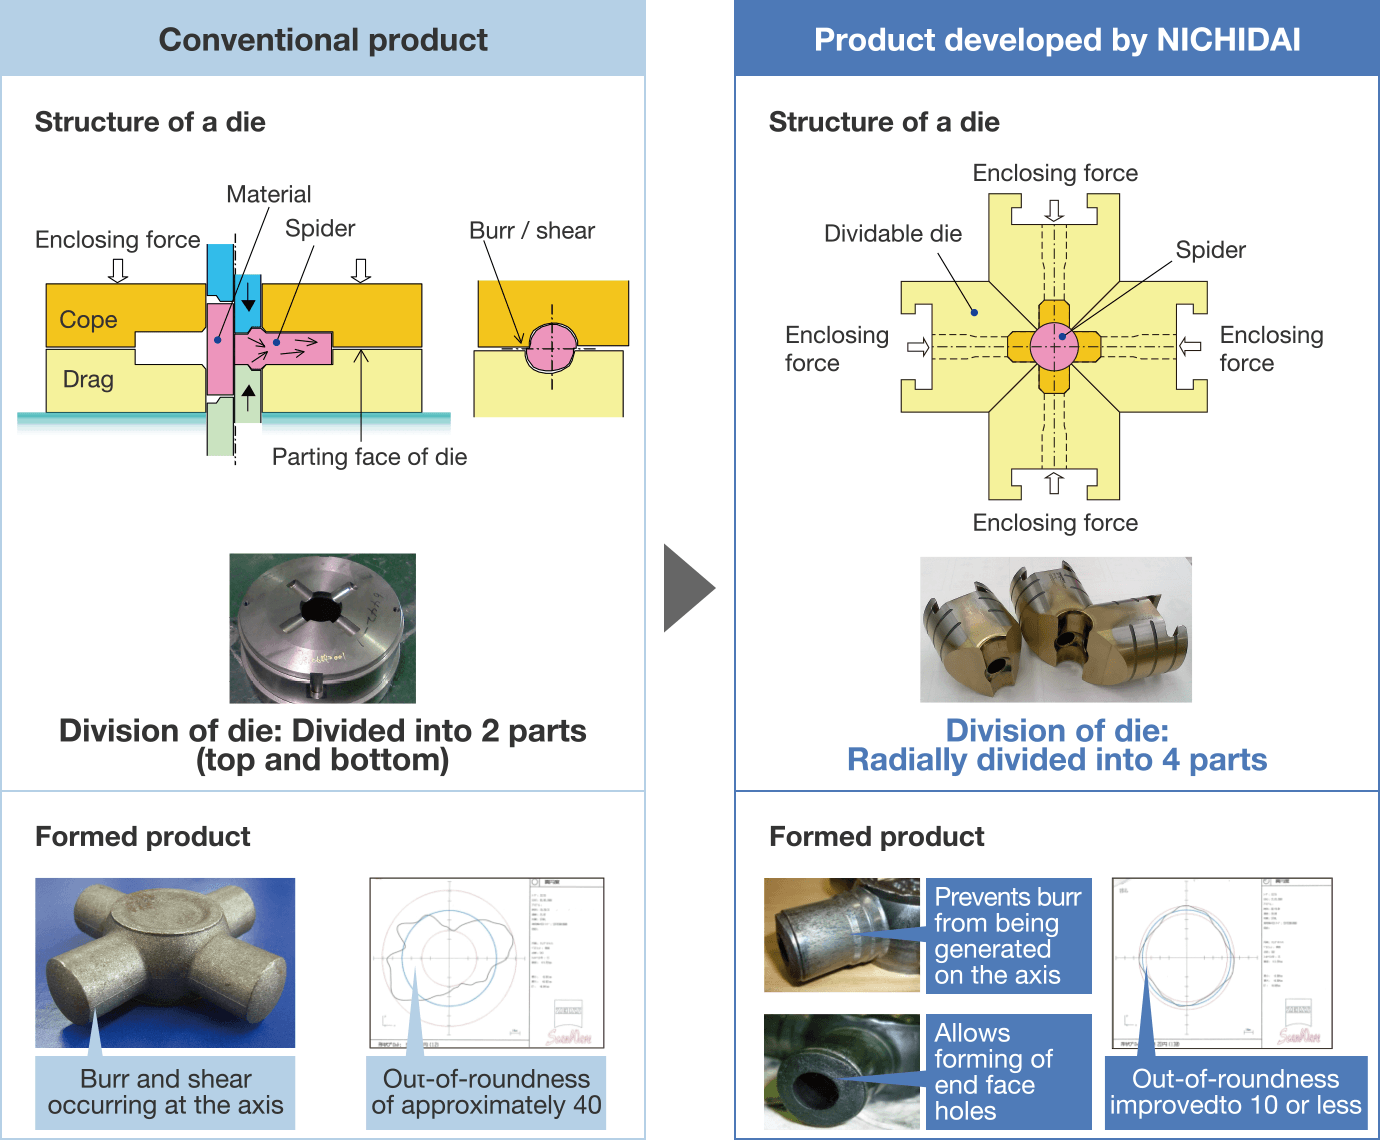 Comparison with conventional technologies]